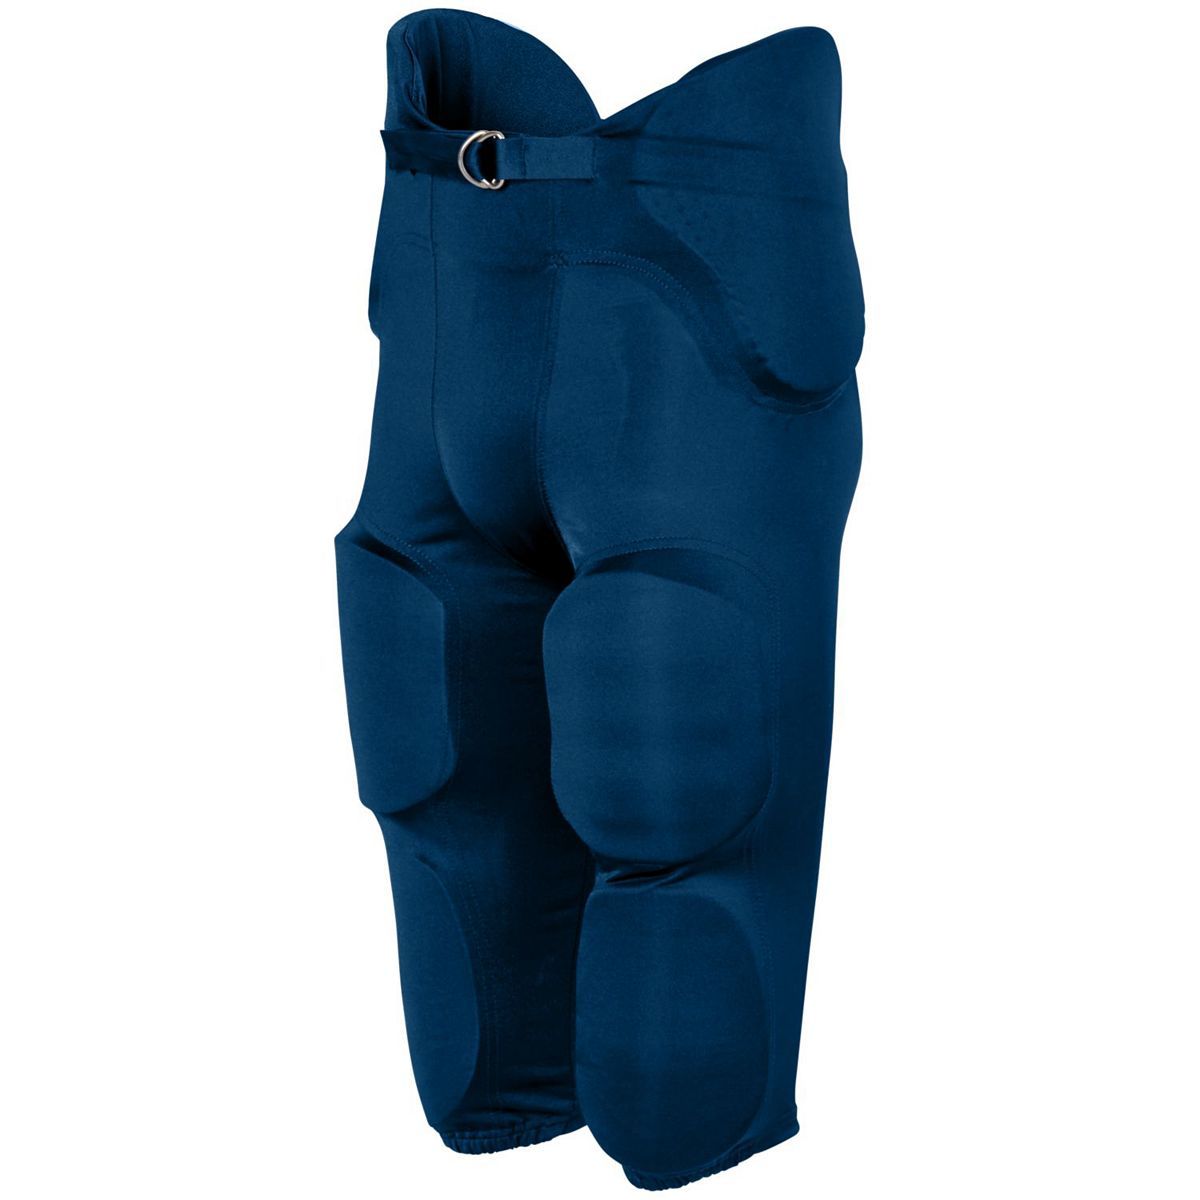 Augusta Sportswear Phantom Integrated Pant in Navy  -Part of the Adult, Adult-Pants, Pants, Augusta-Products, Football, All-Sports, All-Sports-1 product lines at KanaleyCreations.com